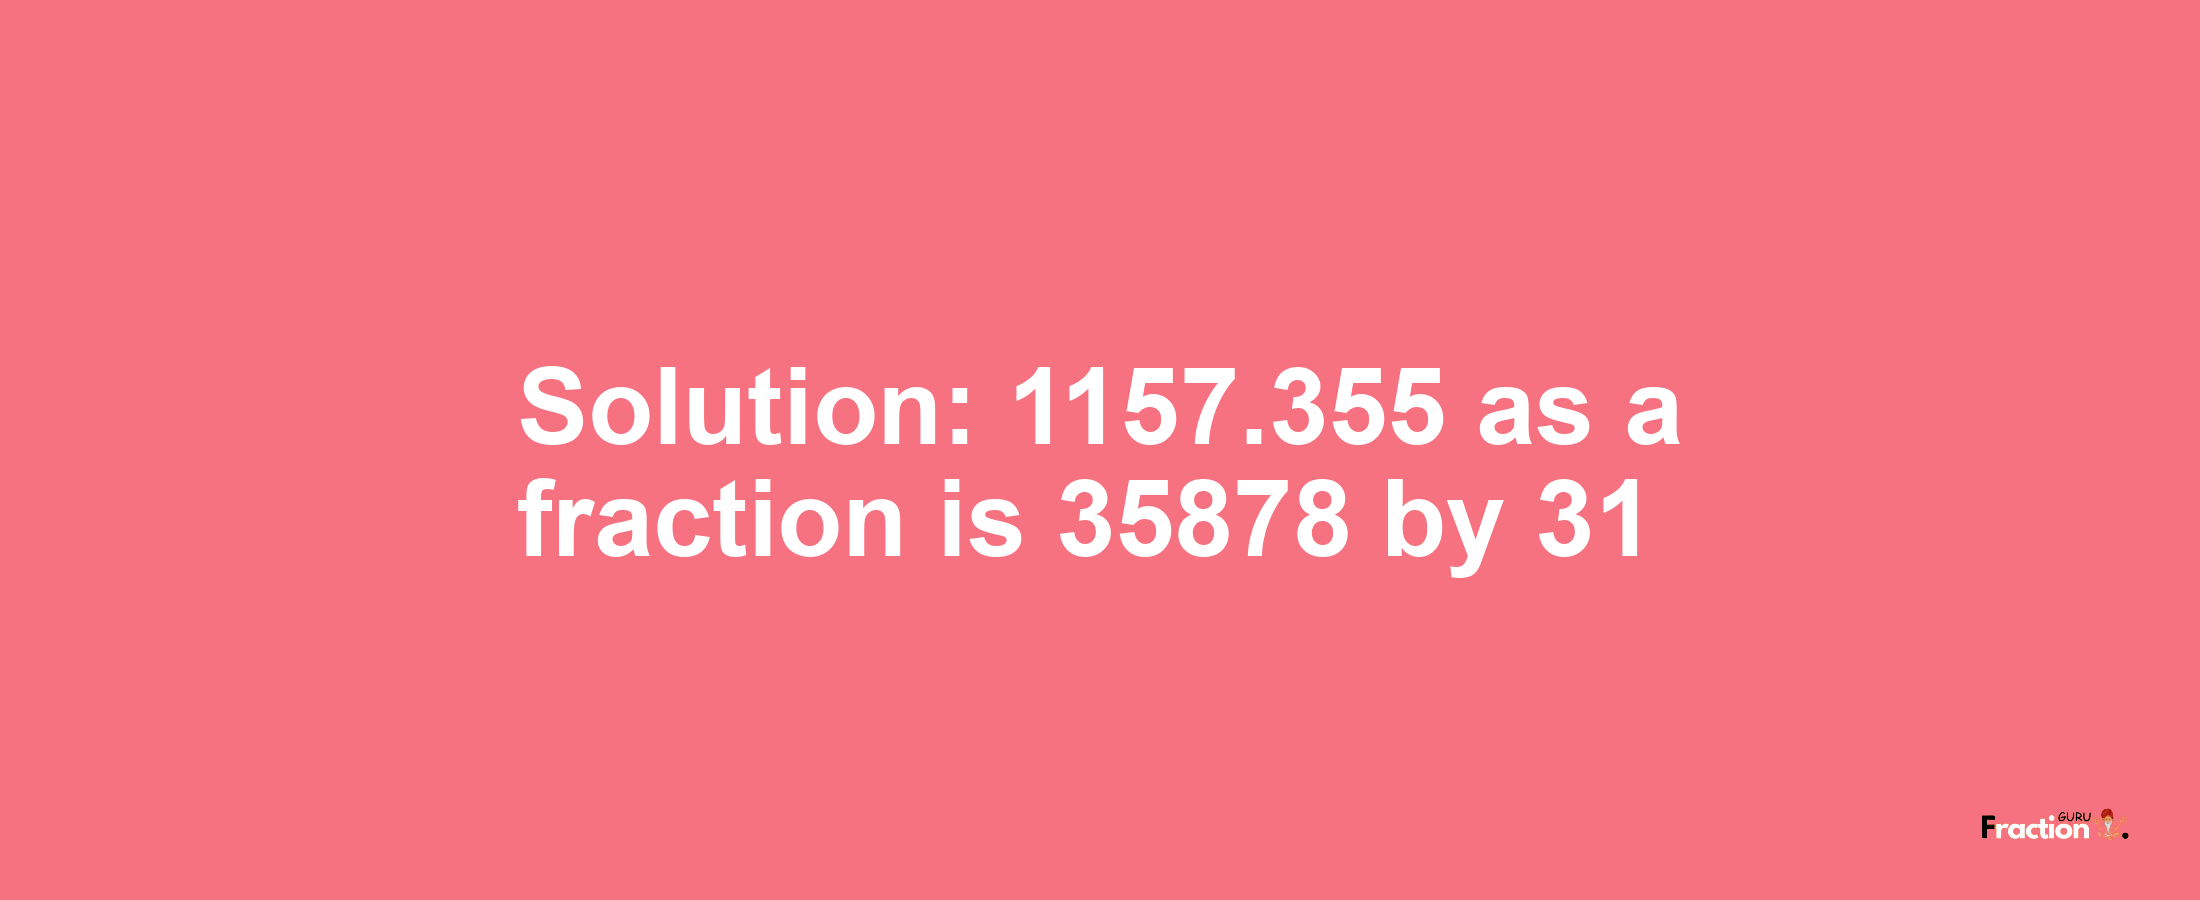 Solution:1157.355 as a fraction is 35878/31